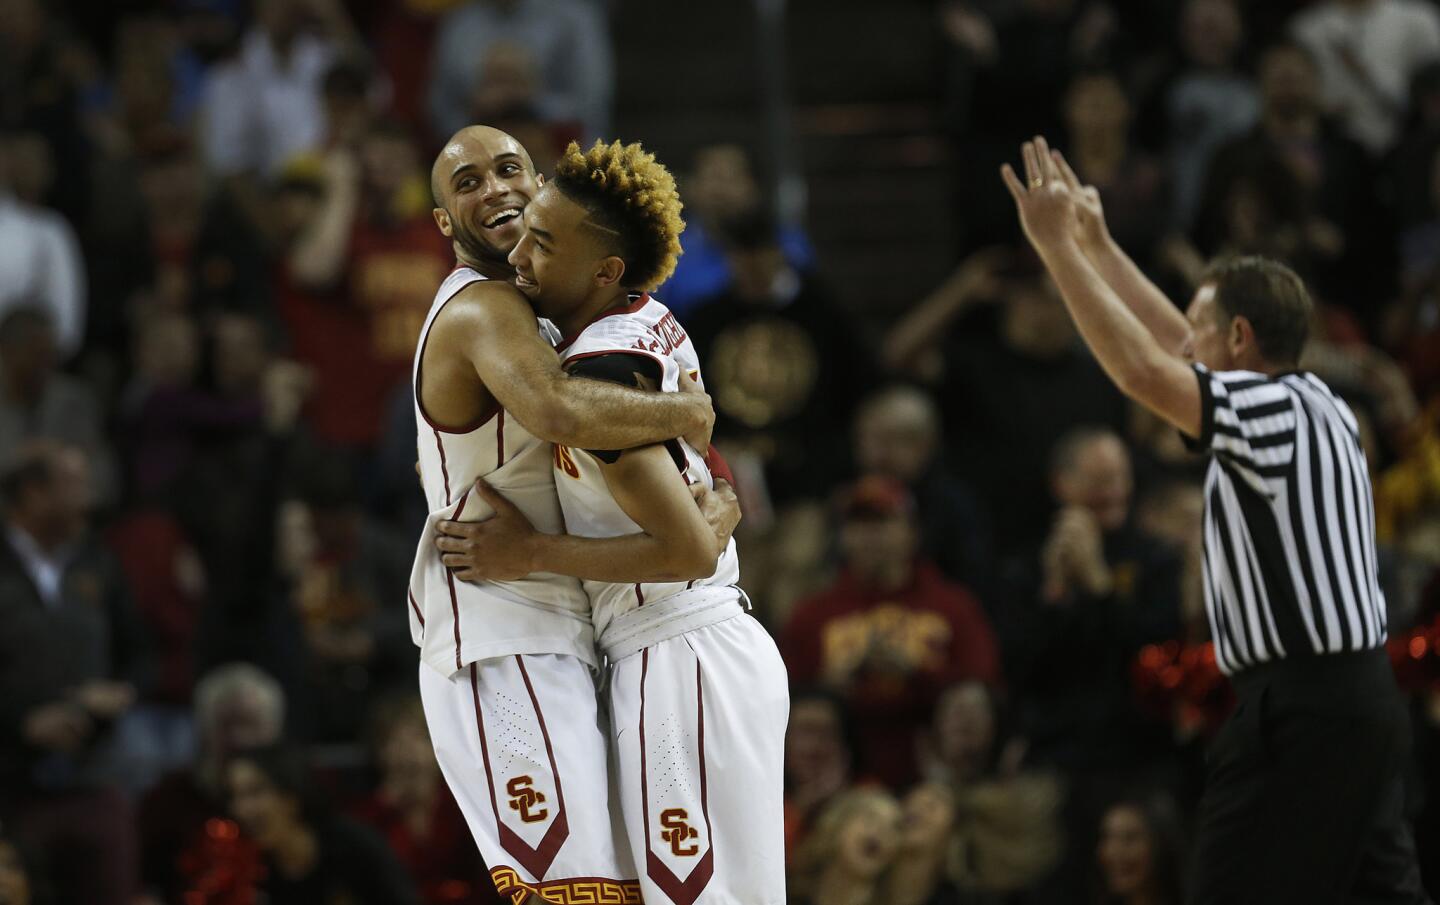 Trojans guards Julian Jacobs, left, and Jordan McLaughlin celebrate after making one final three-pointer during an 80-61 victory over the Bruins on Thursday night at the Galen Center.